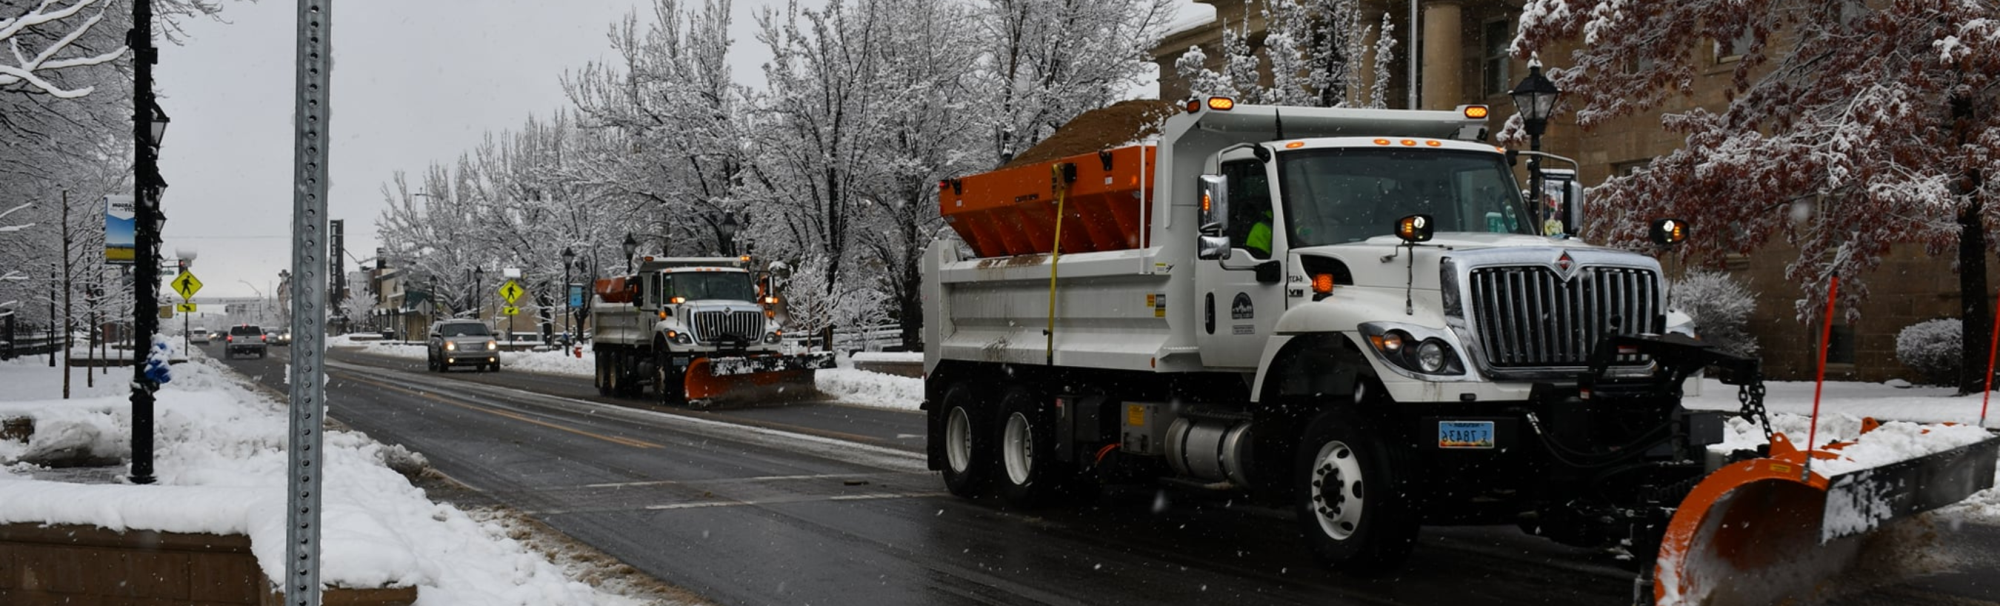 Streets Division Removing Snow